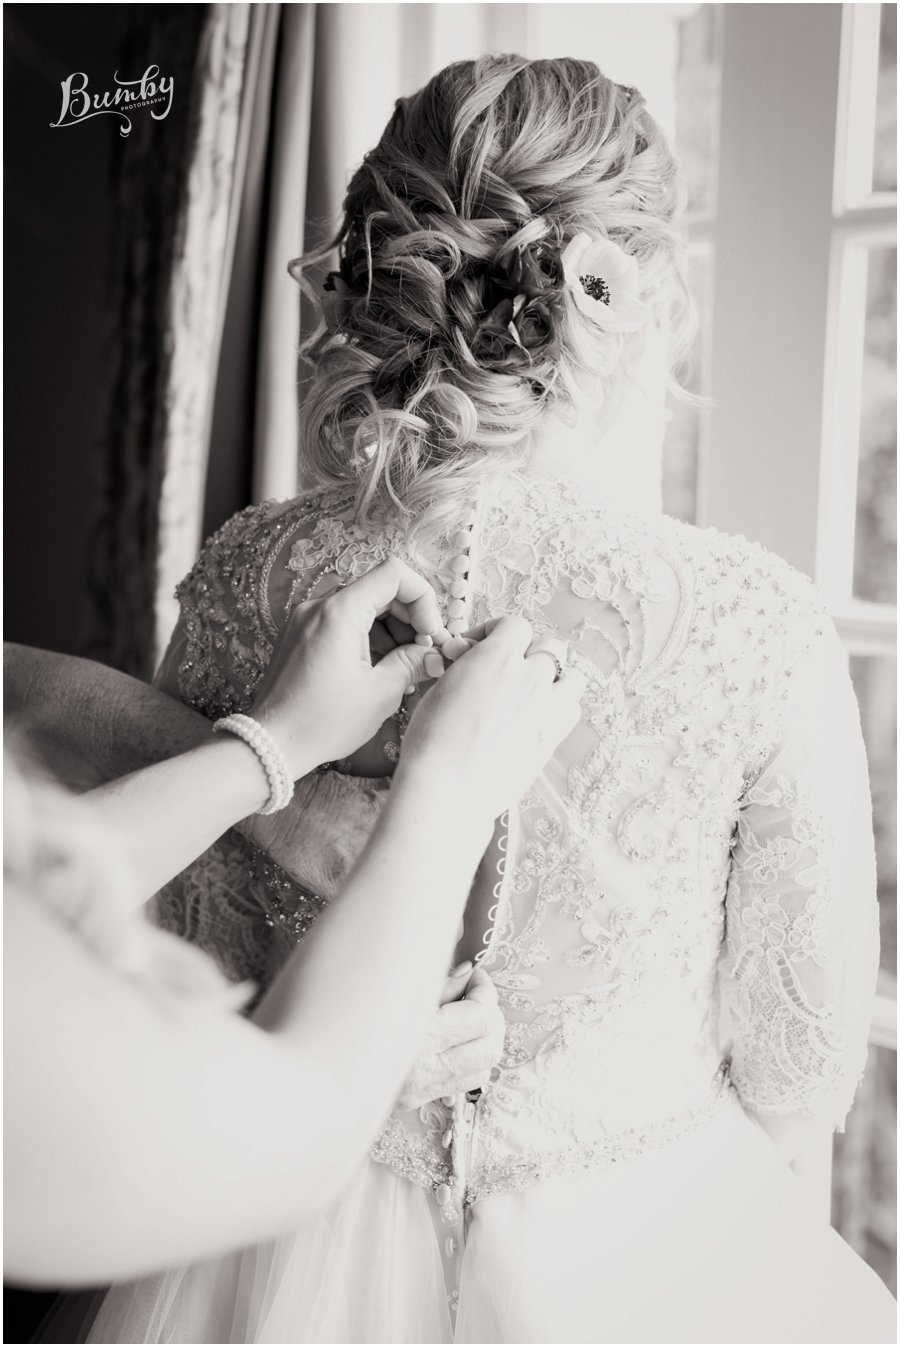 Black and white photo of the bride having her dress buttoned up.